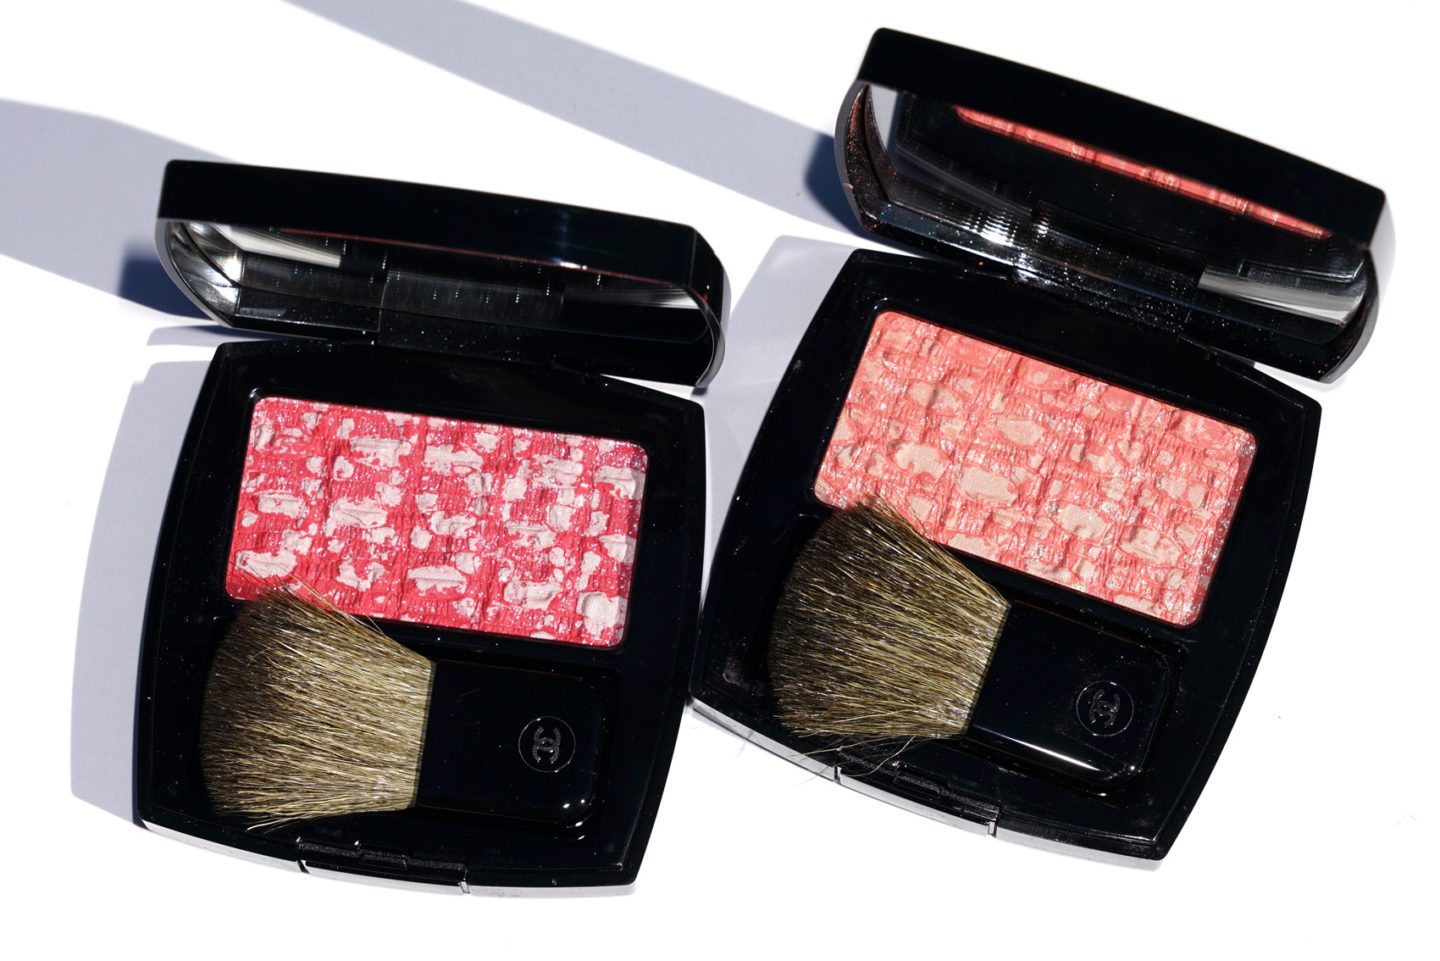 Chanel Les Tissages de Chanel Blush Duo Tweed Effect in Cherry Blossom and Coralline | The Beauty Look Book